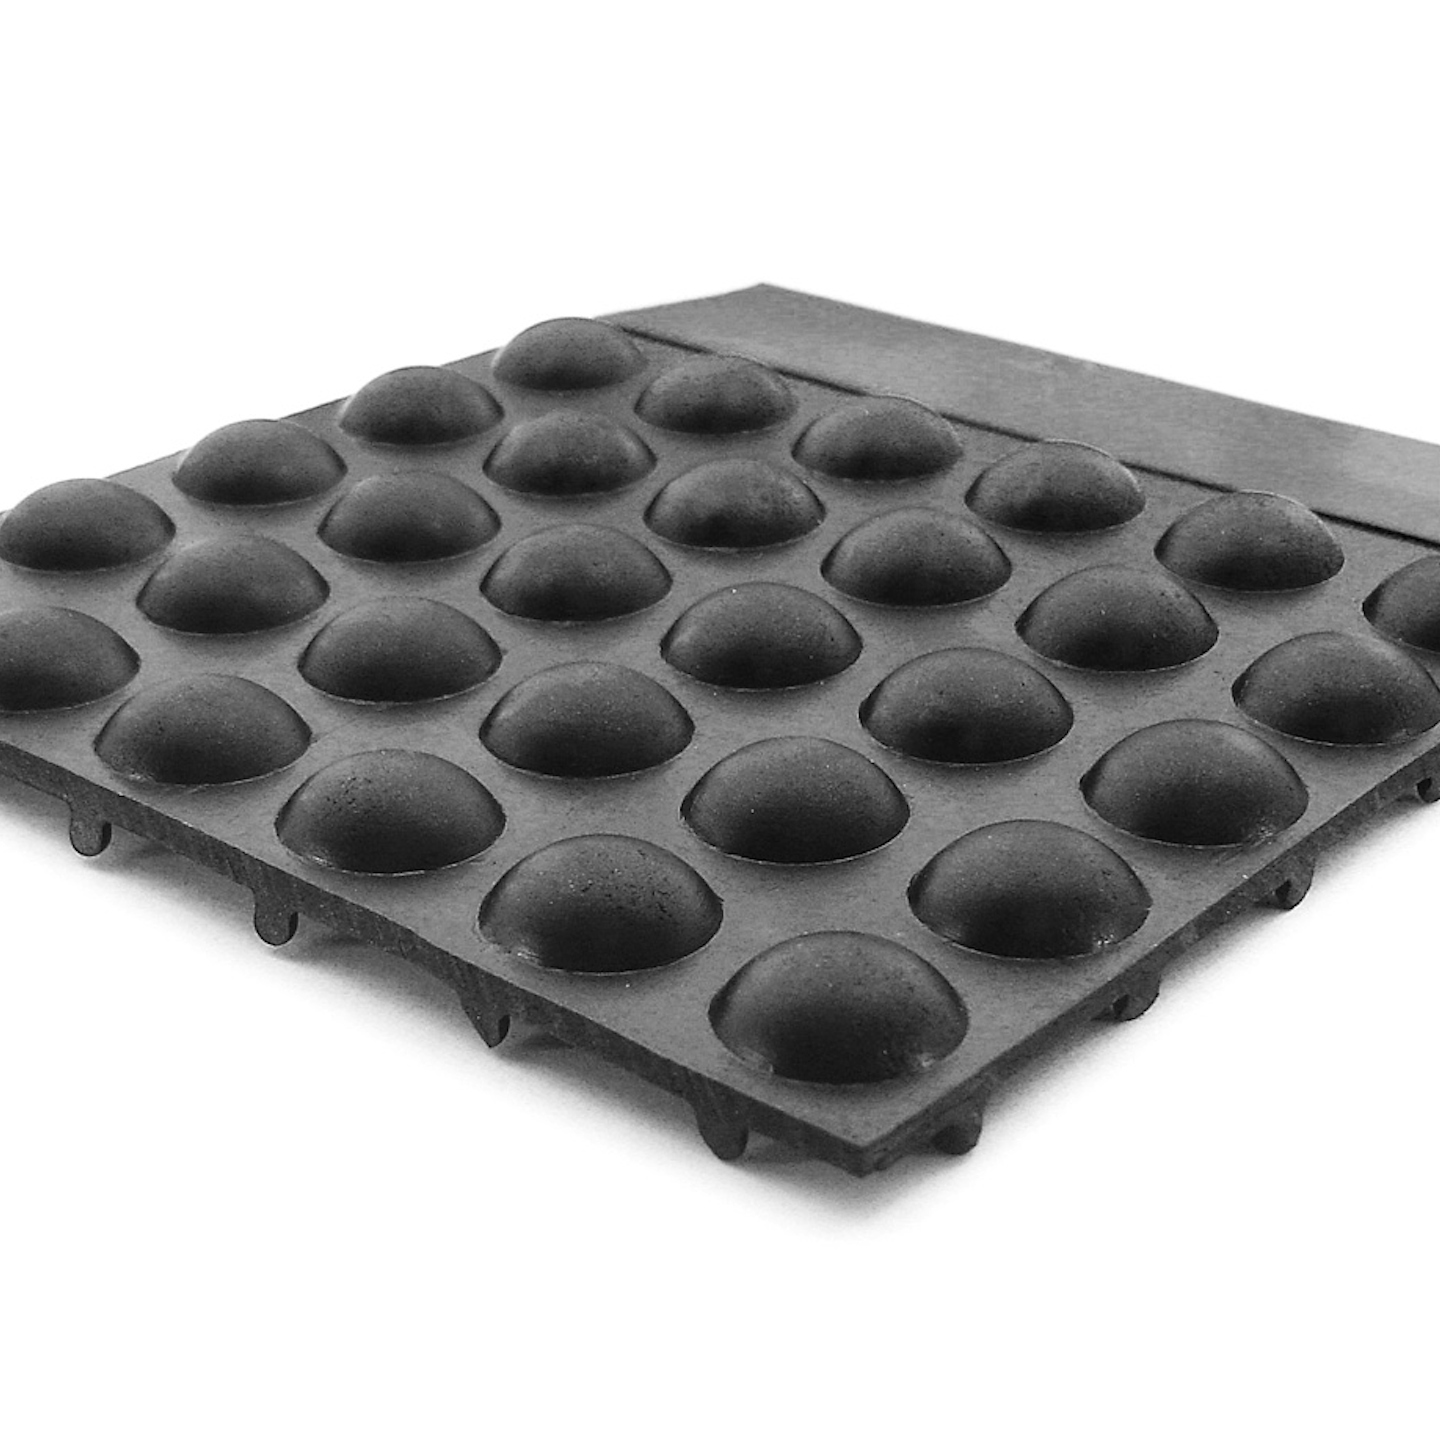 Floor Mat, ESD & Conductive, For Your Work Area